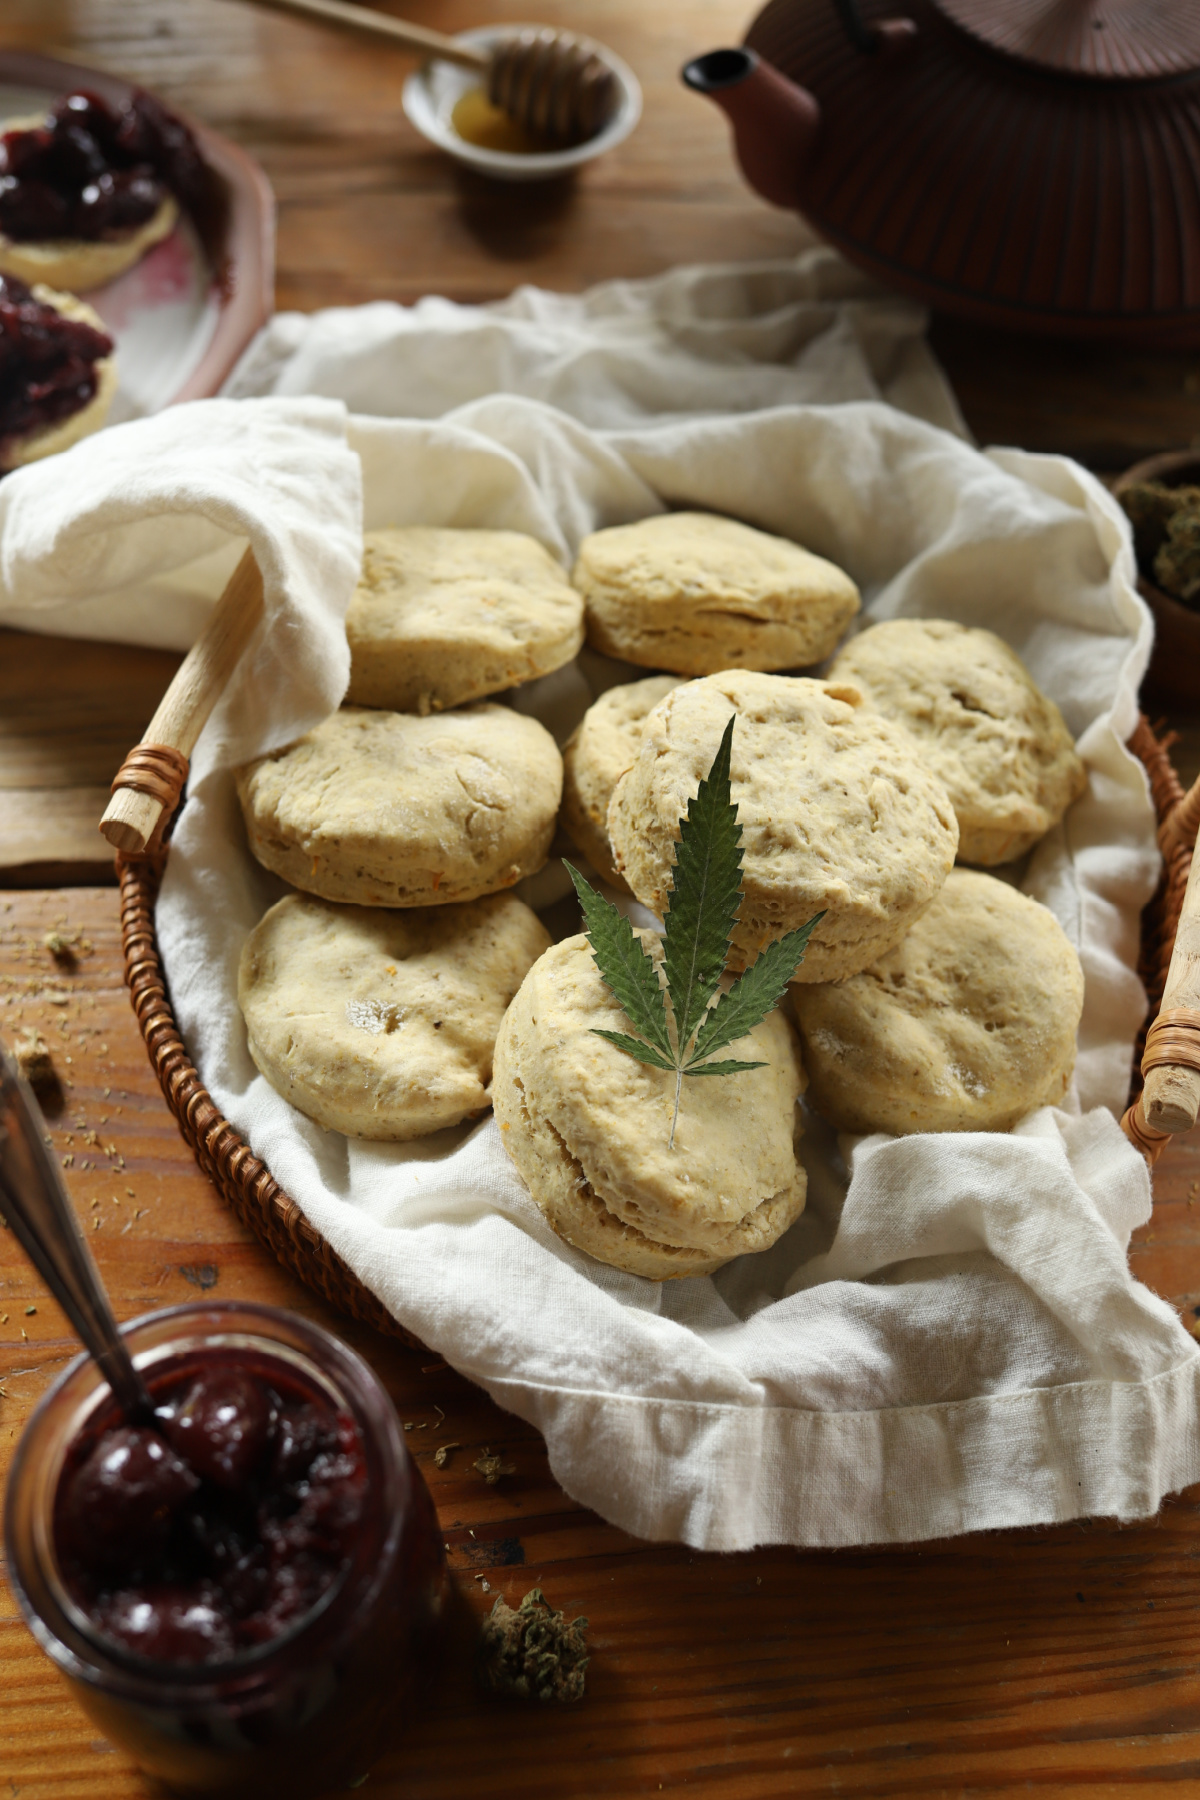 baked biscuits and jelly from bedtime biscuits recipe